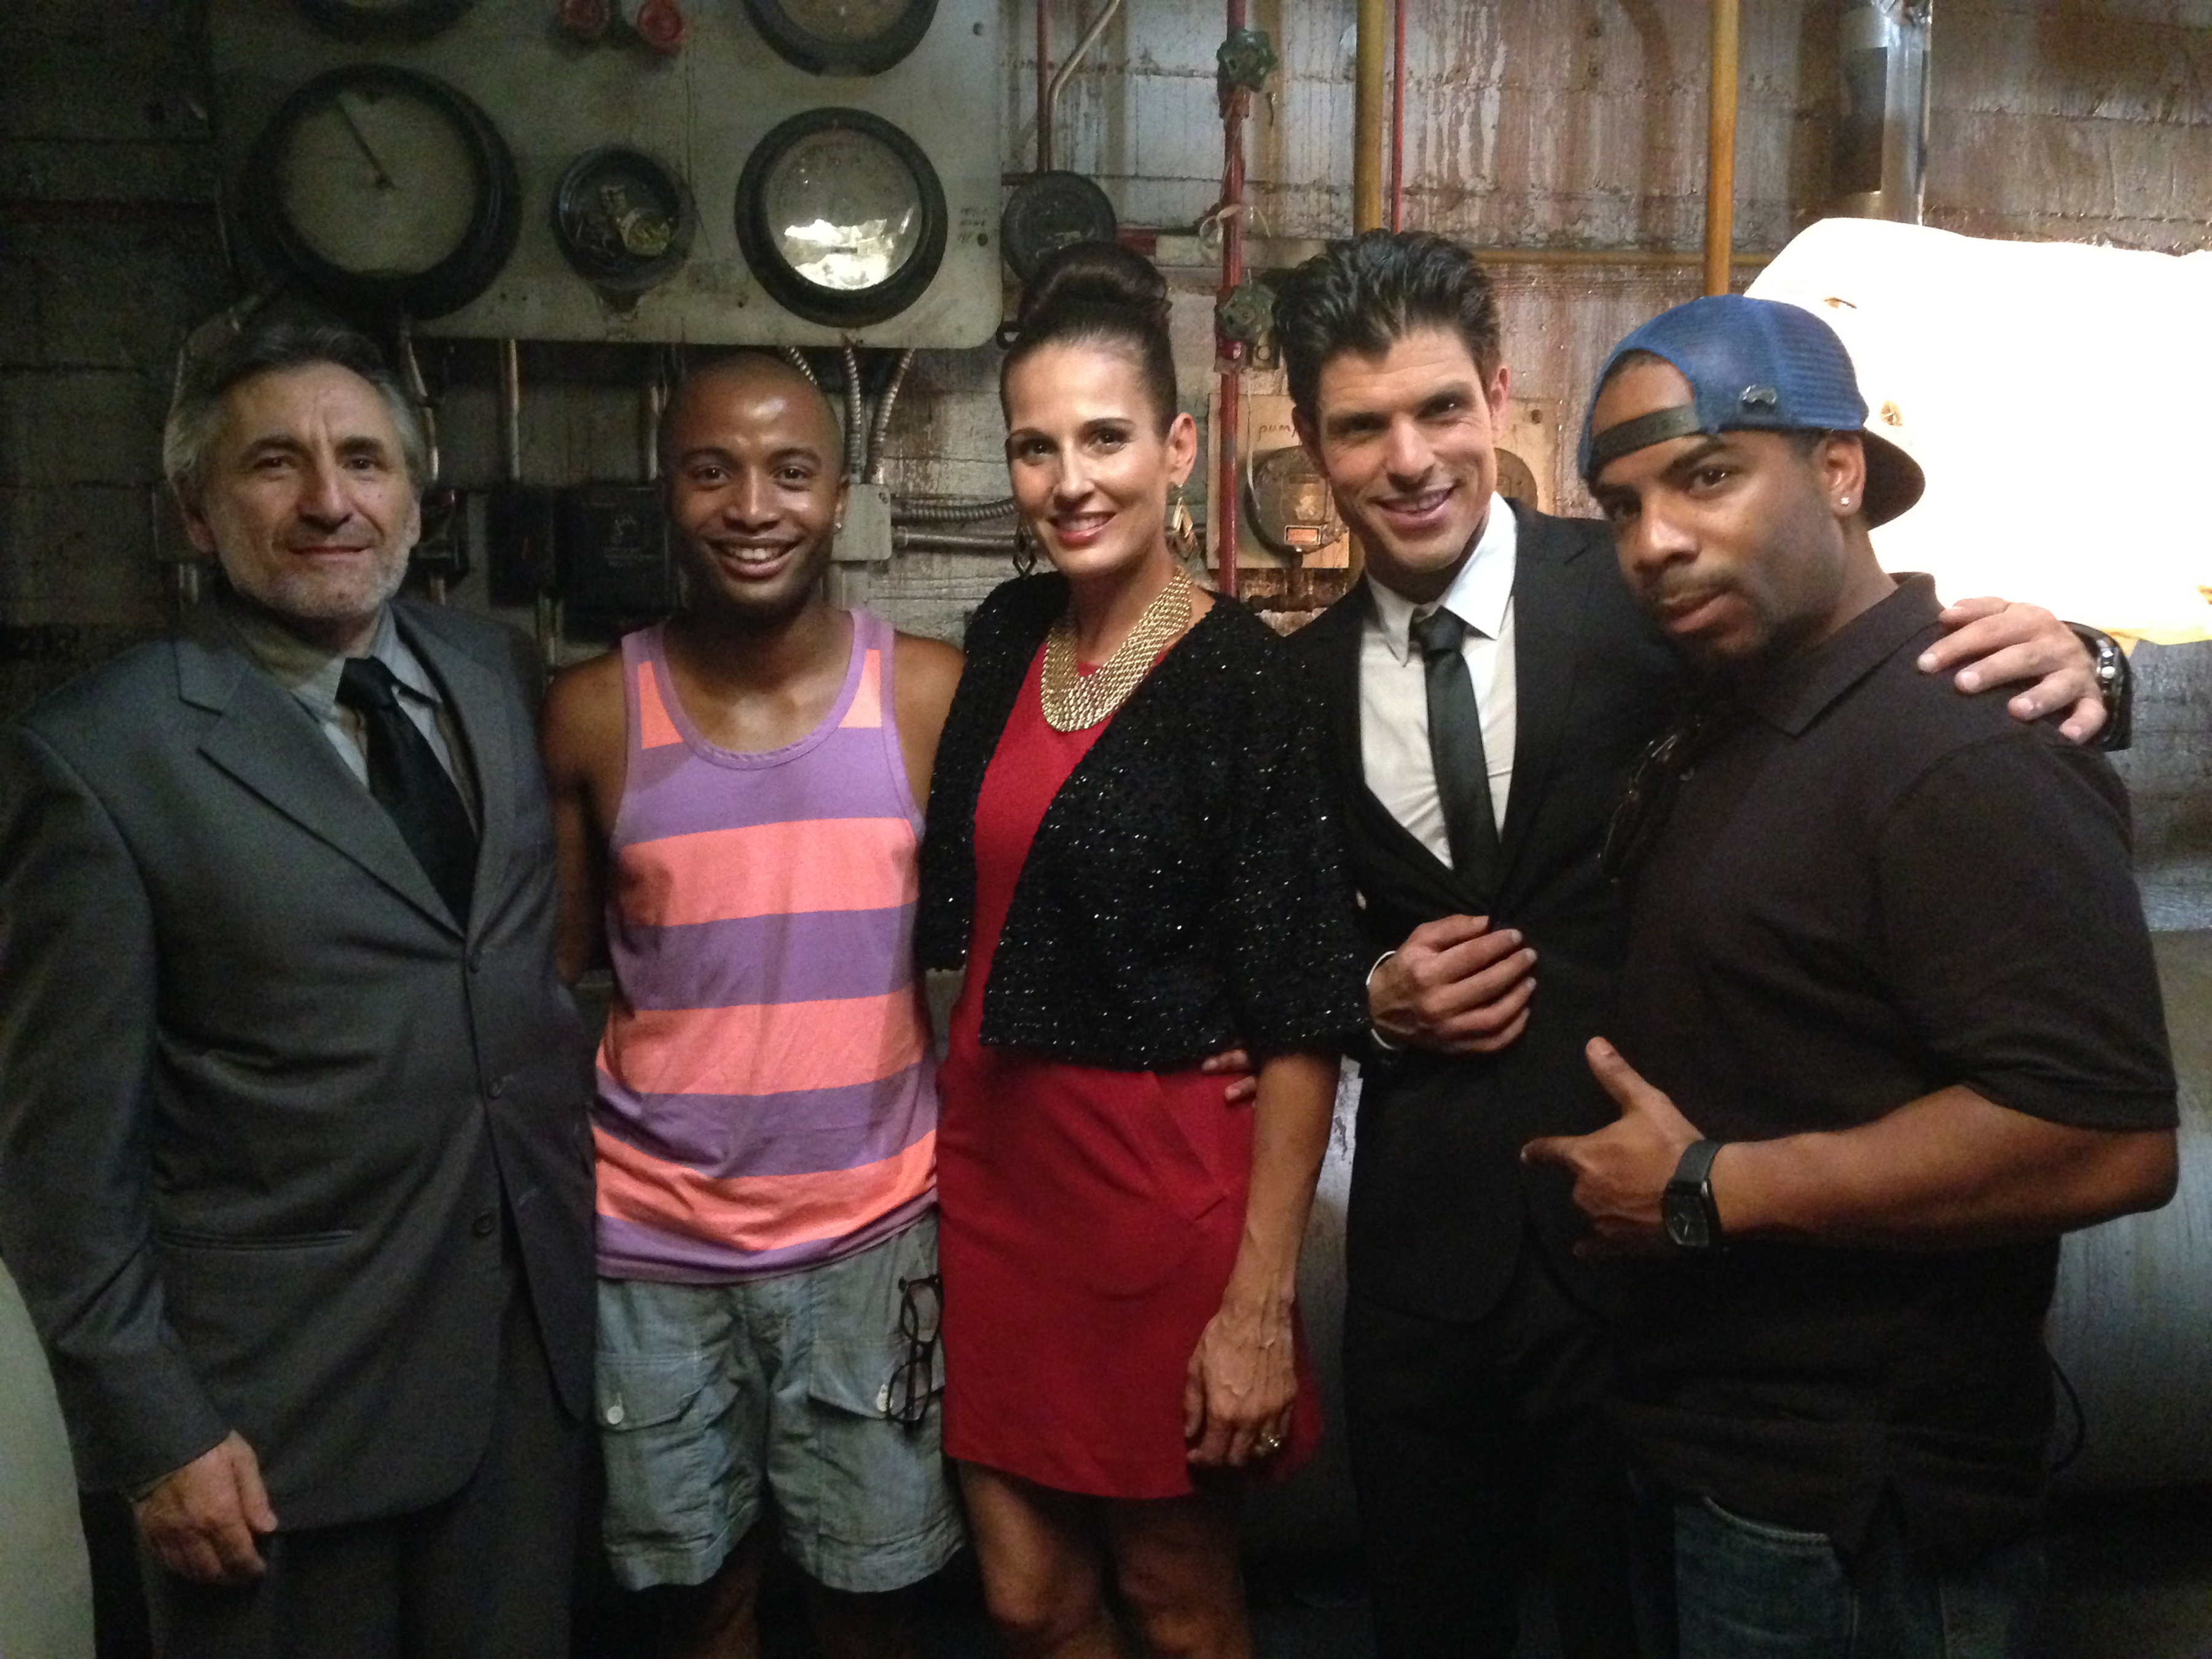 Lou Volpe with director Justin Chambers (I), Lisa Roumain, Andy Martinez and producer William Alexander IV on the set of Justin Chambers' new film 